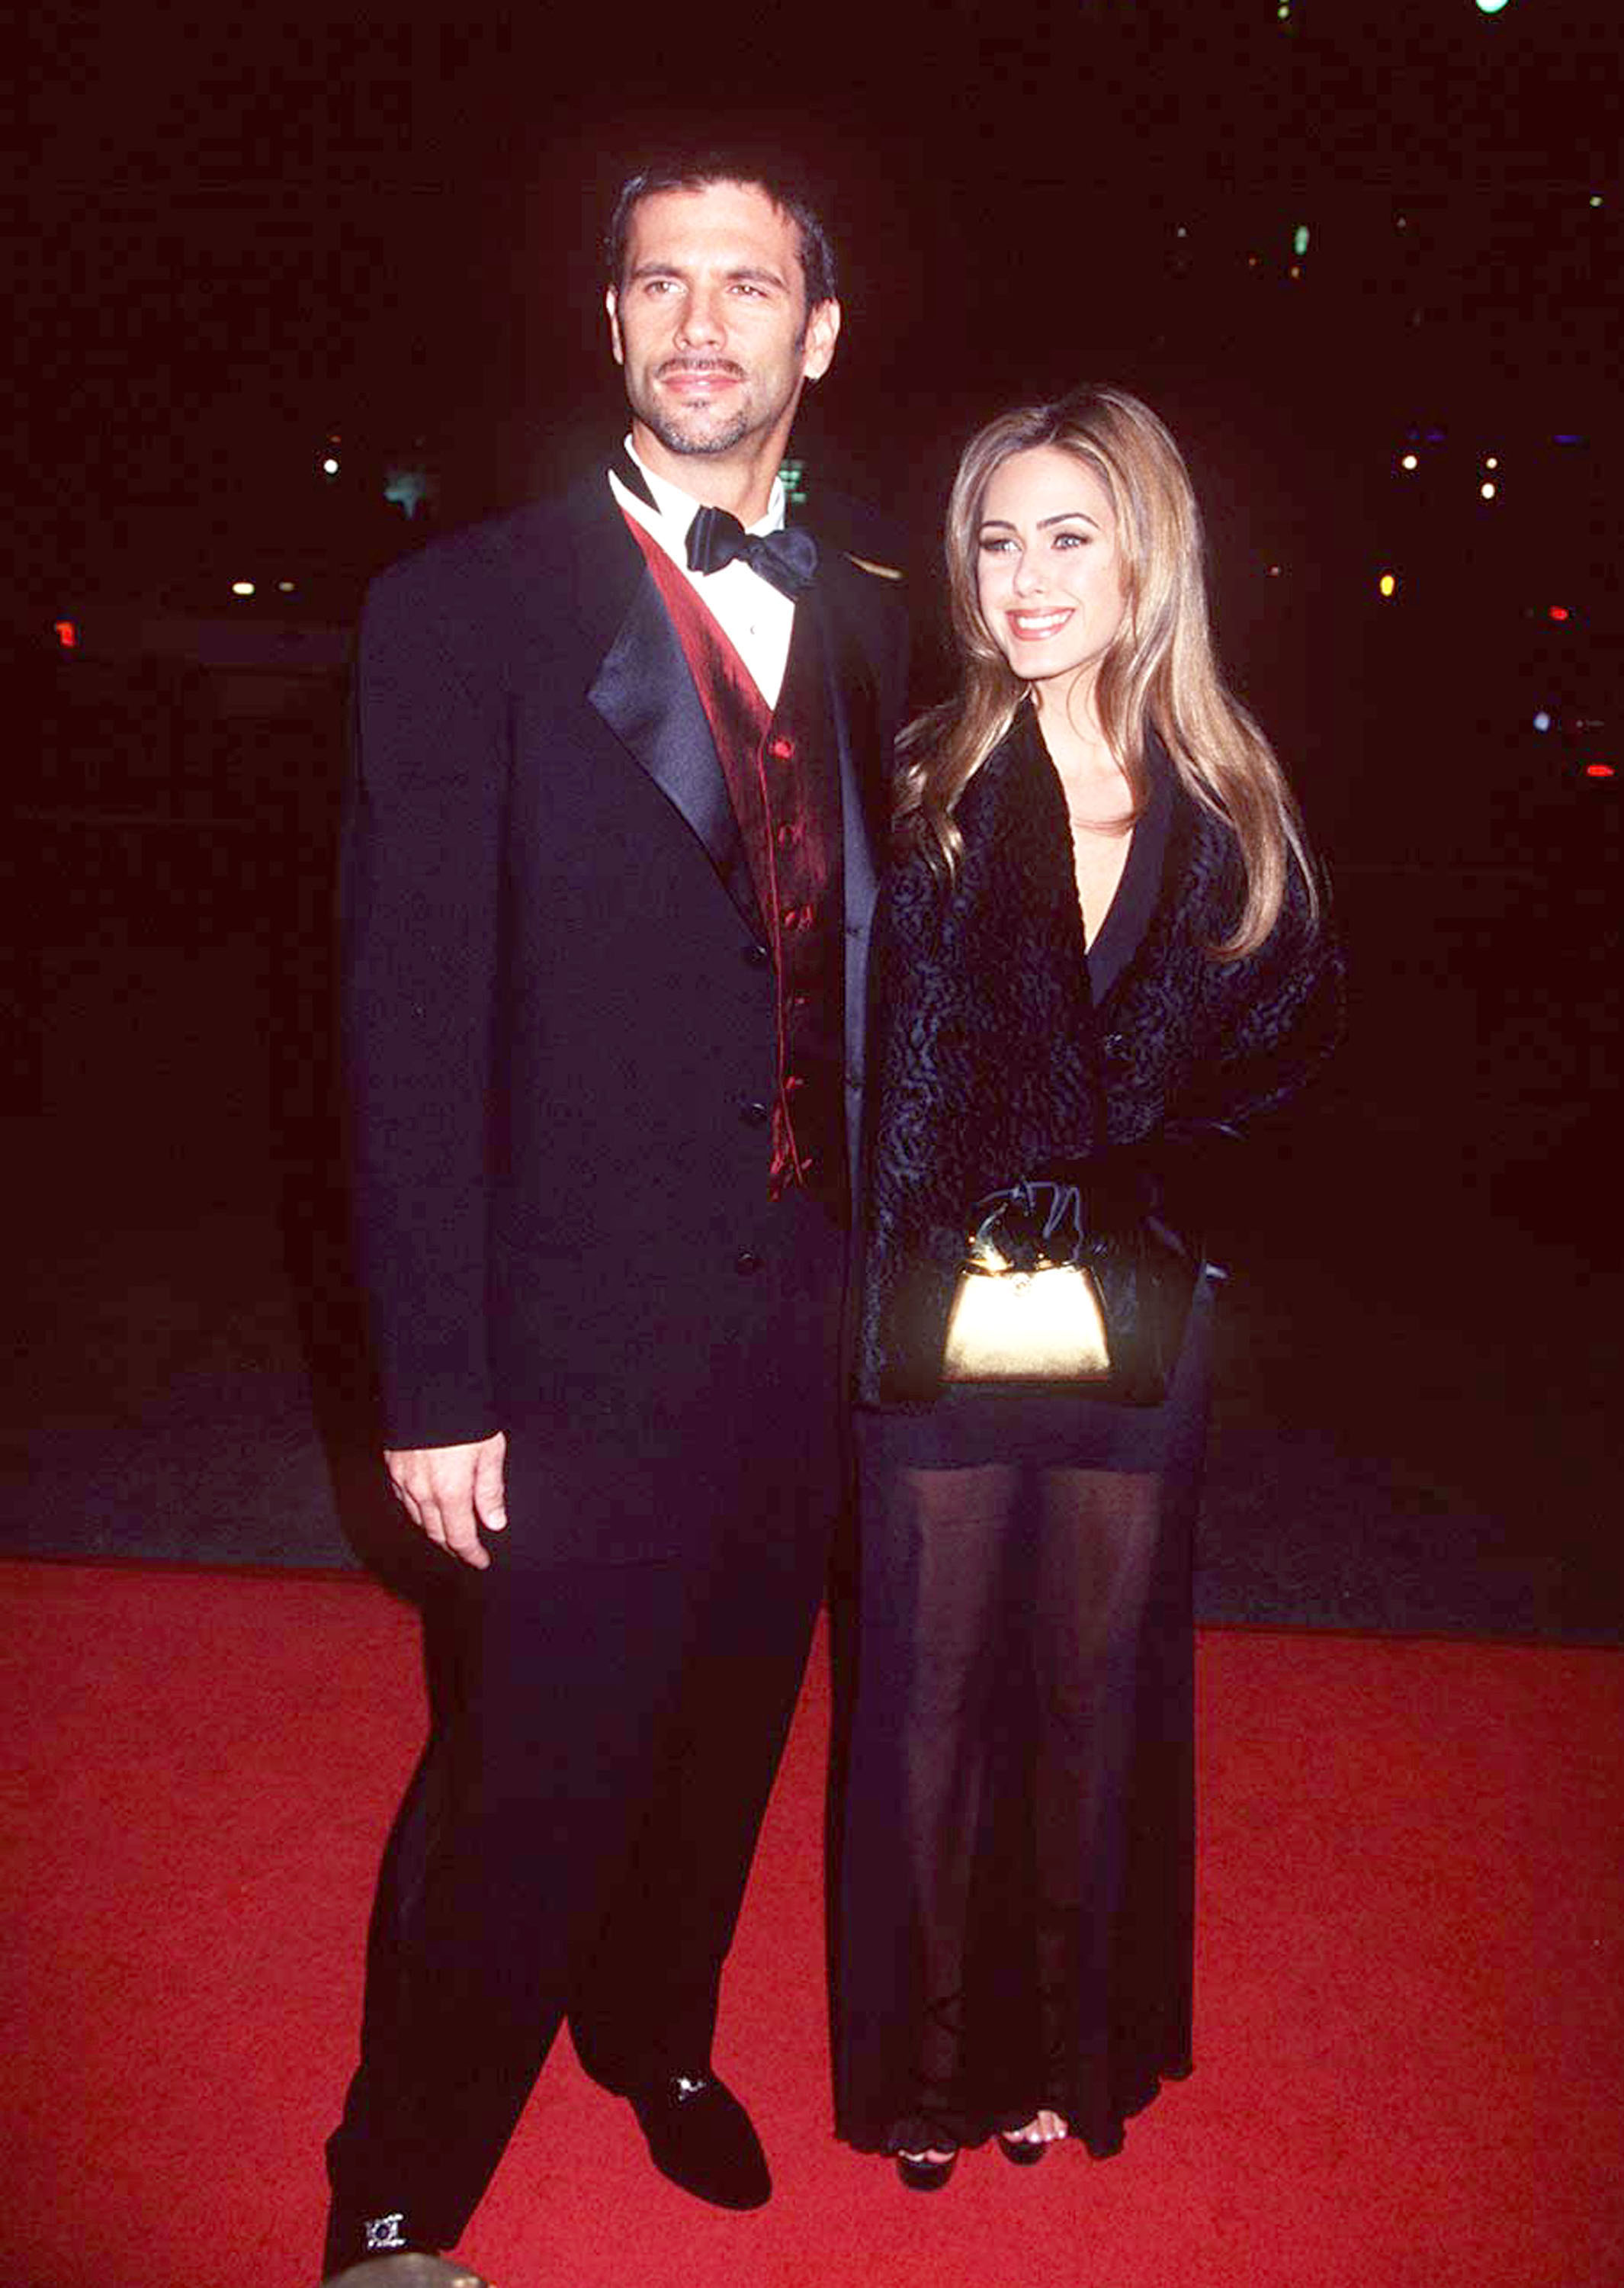 Lorenzo Lamas and Shauna Sand during the 26th Annual Nosotros Golden Eagle Awards on February 9, 1997 in Los Angeles, California | Source: Getty Images